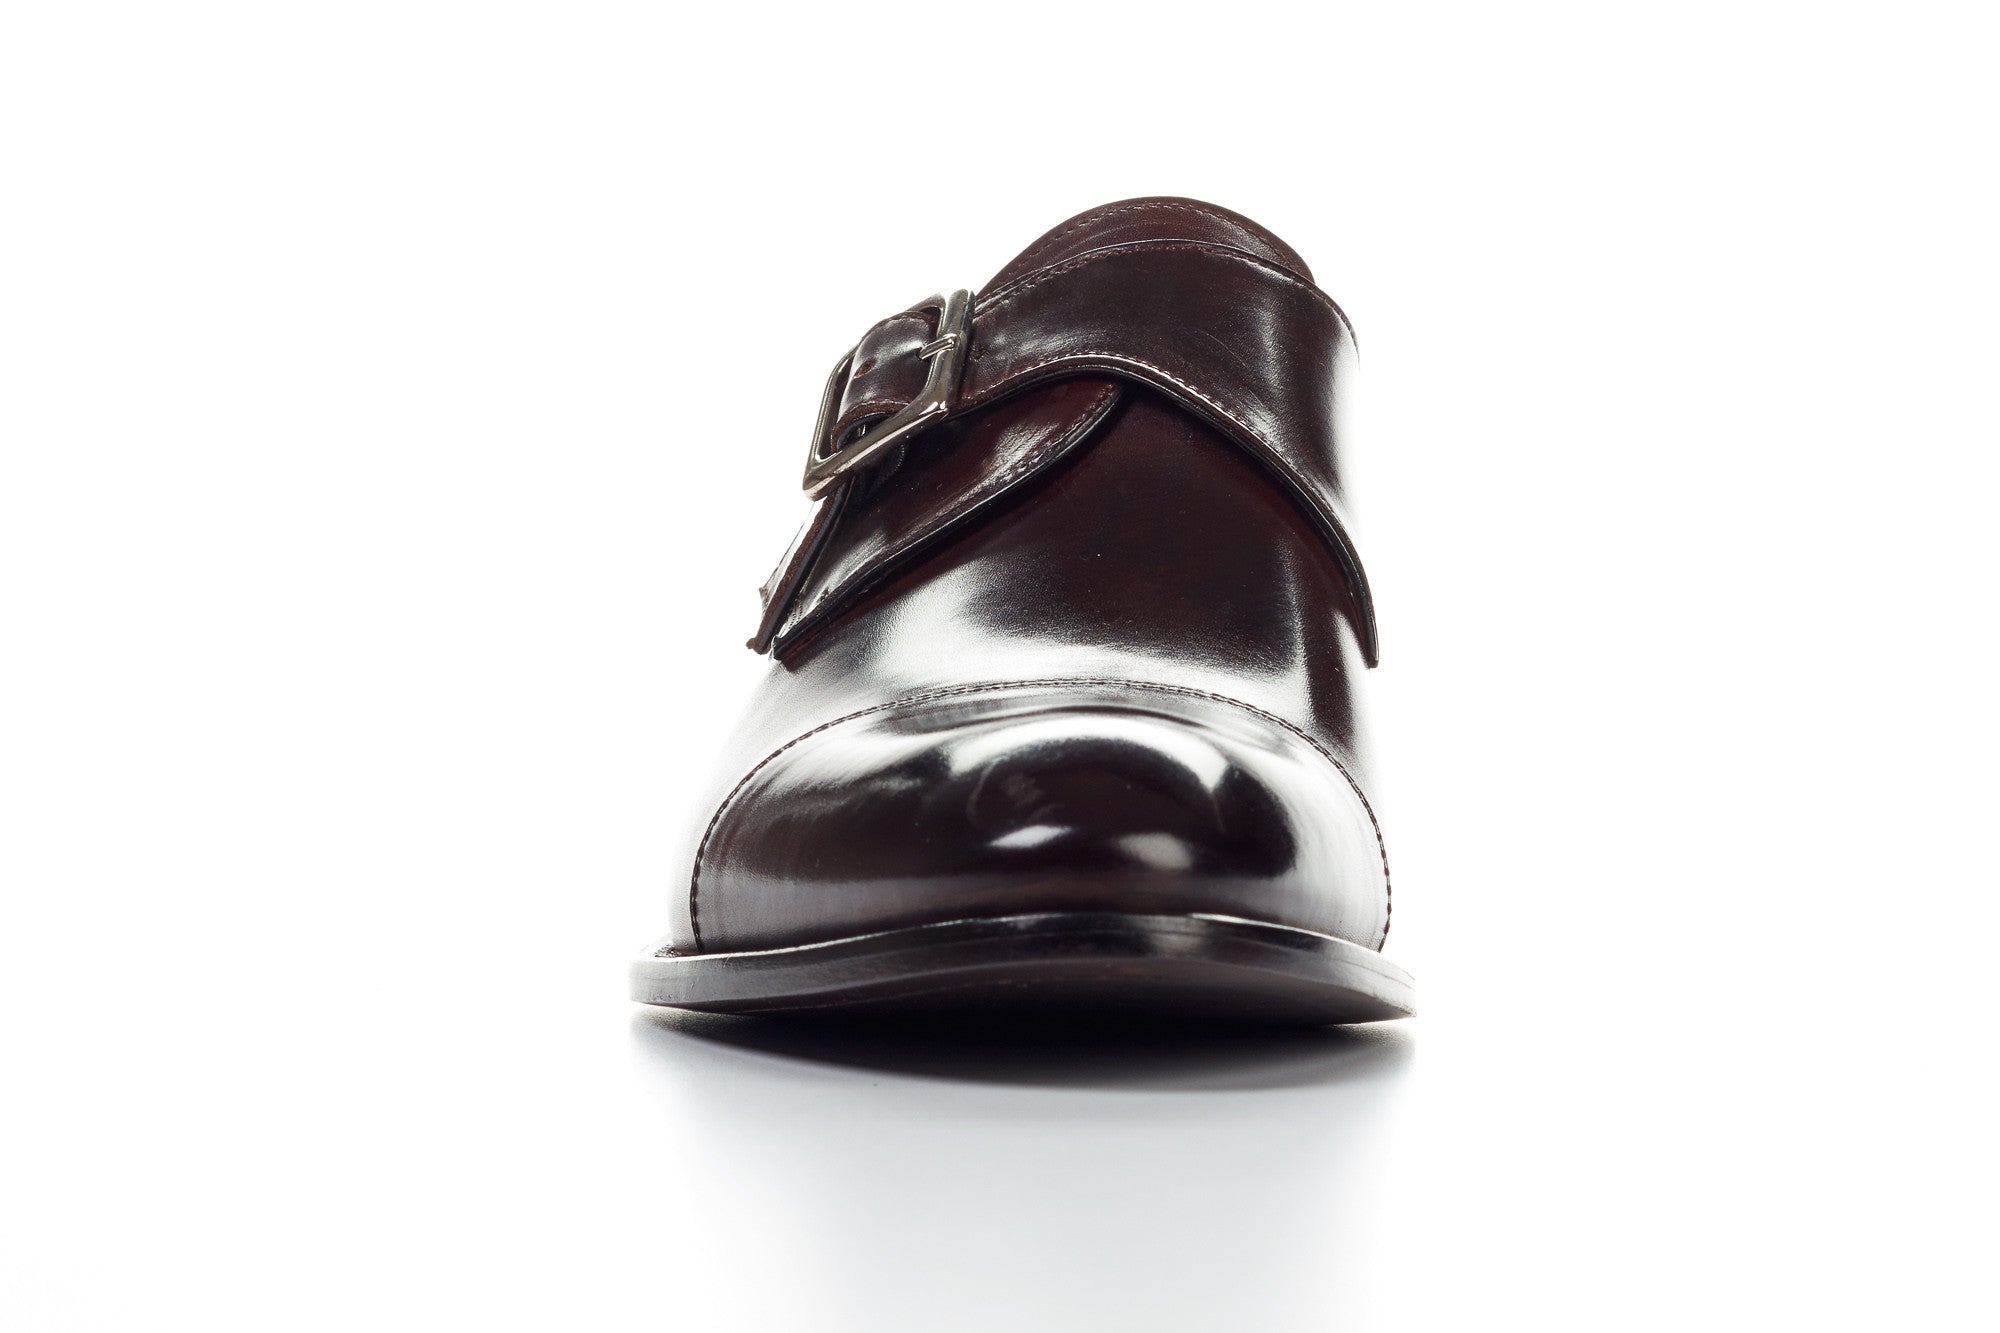 The Olivier Single Monk Strap - Chocolate